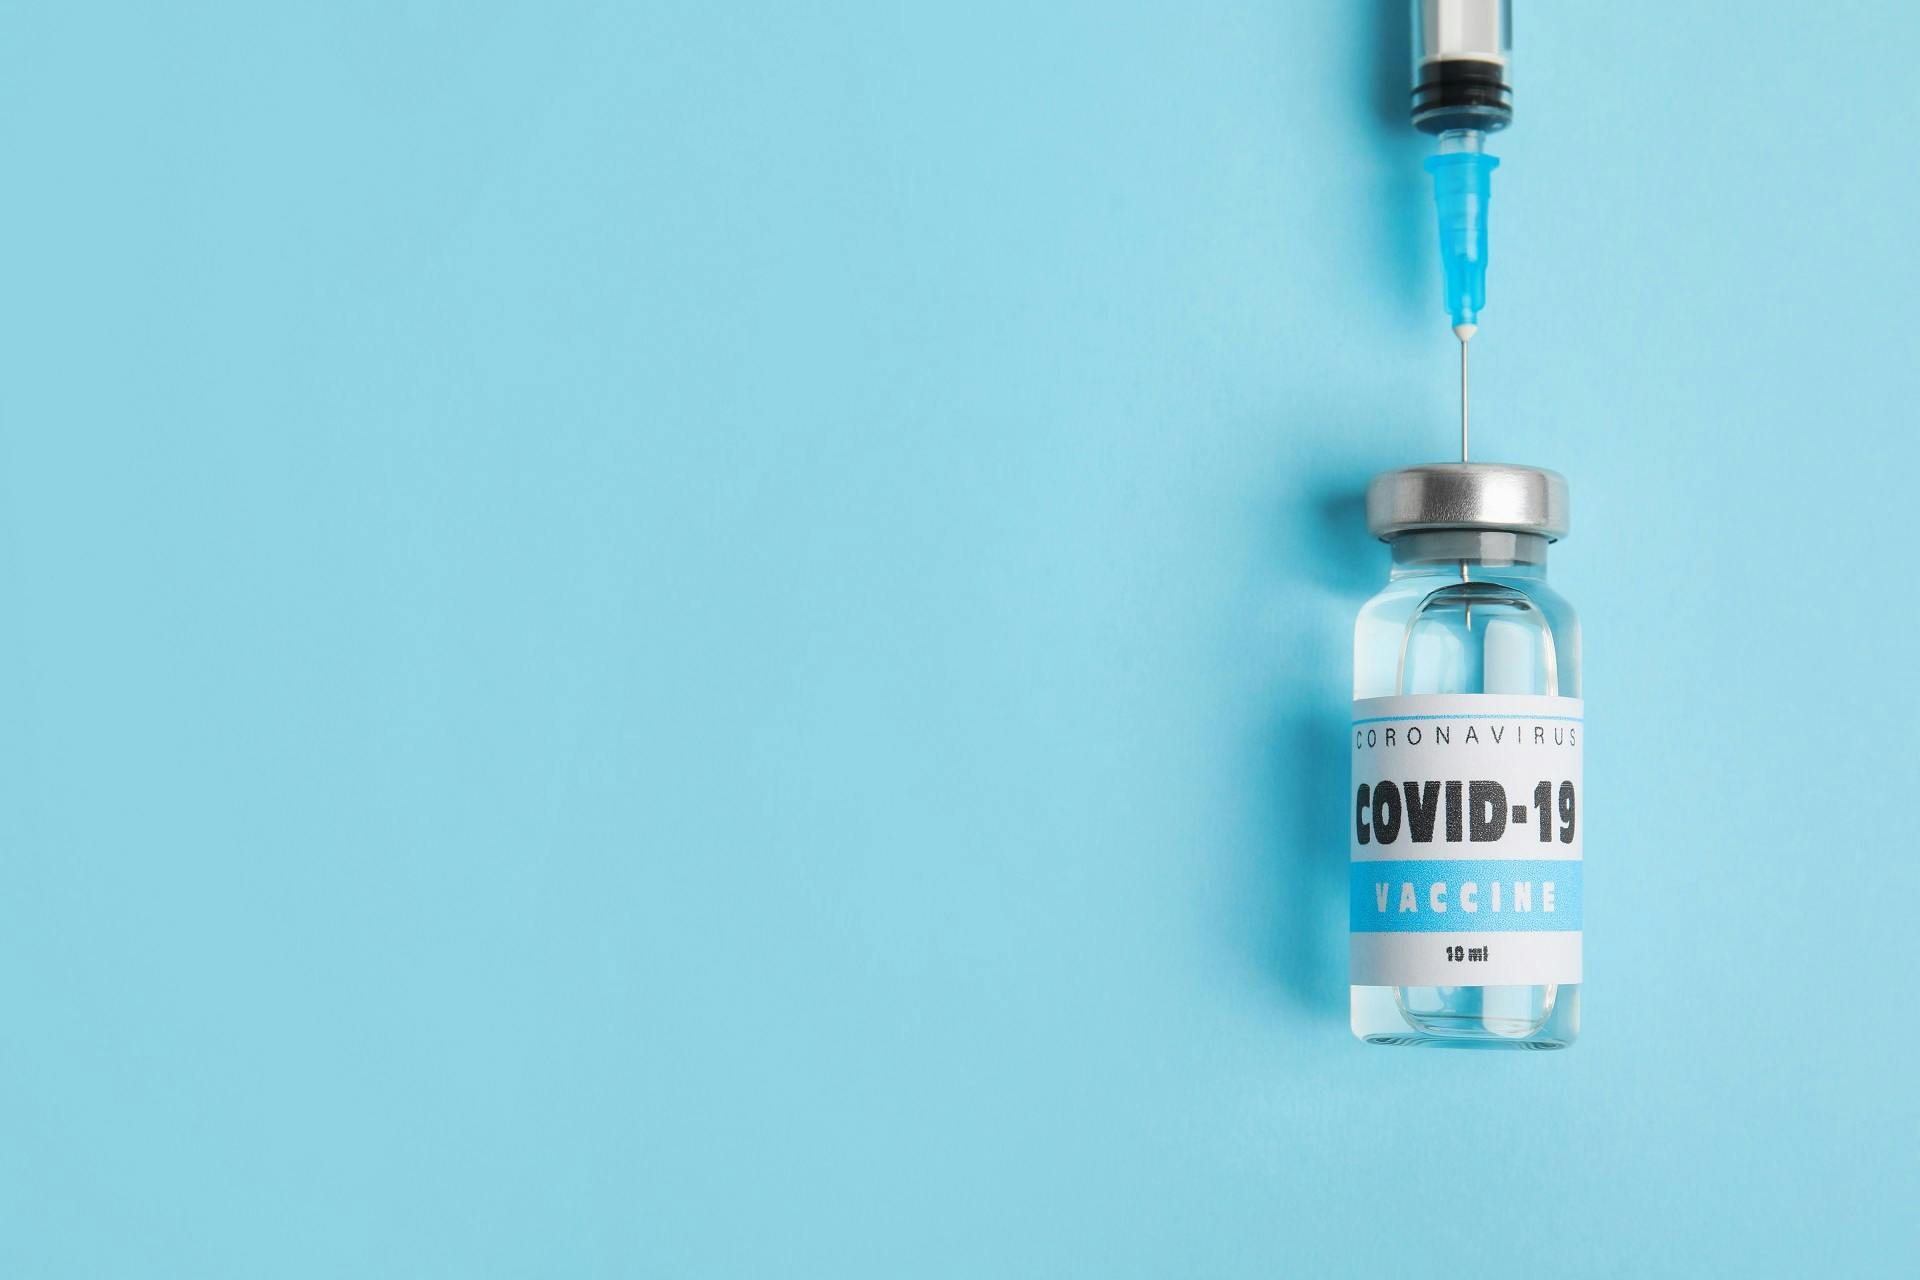 COVID vaccine vial and syringe on blue background